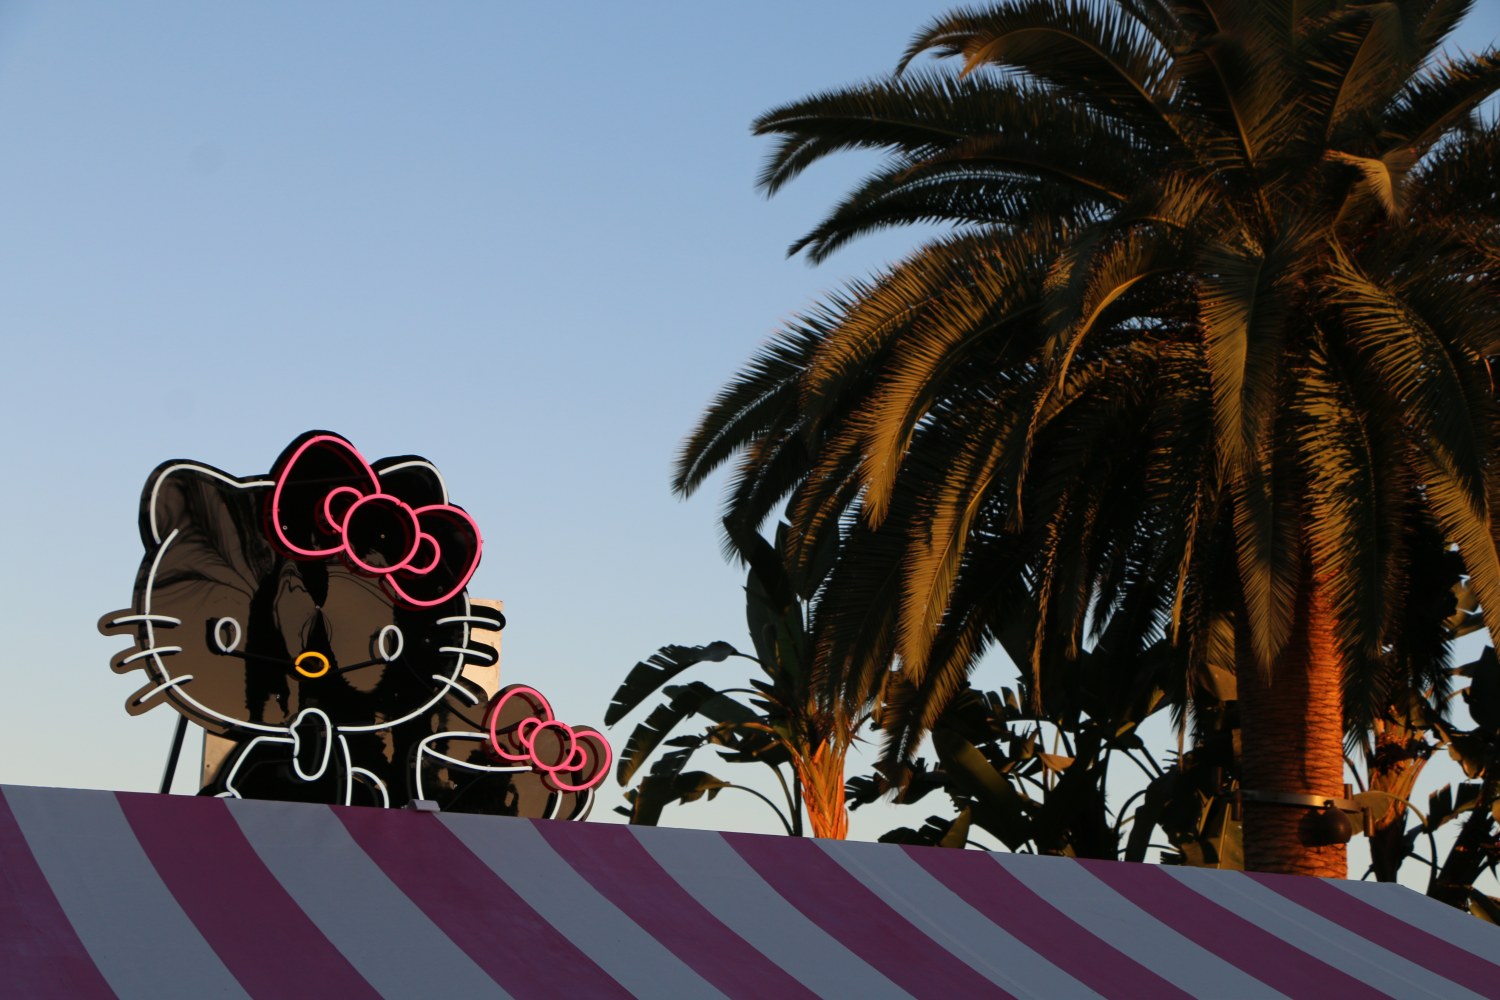 15 Hello Kitty-Themed Attractions Around the World